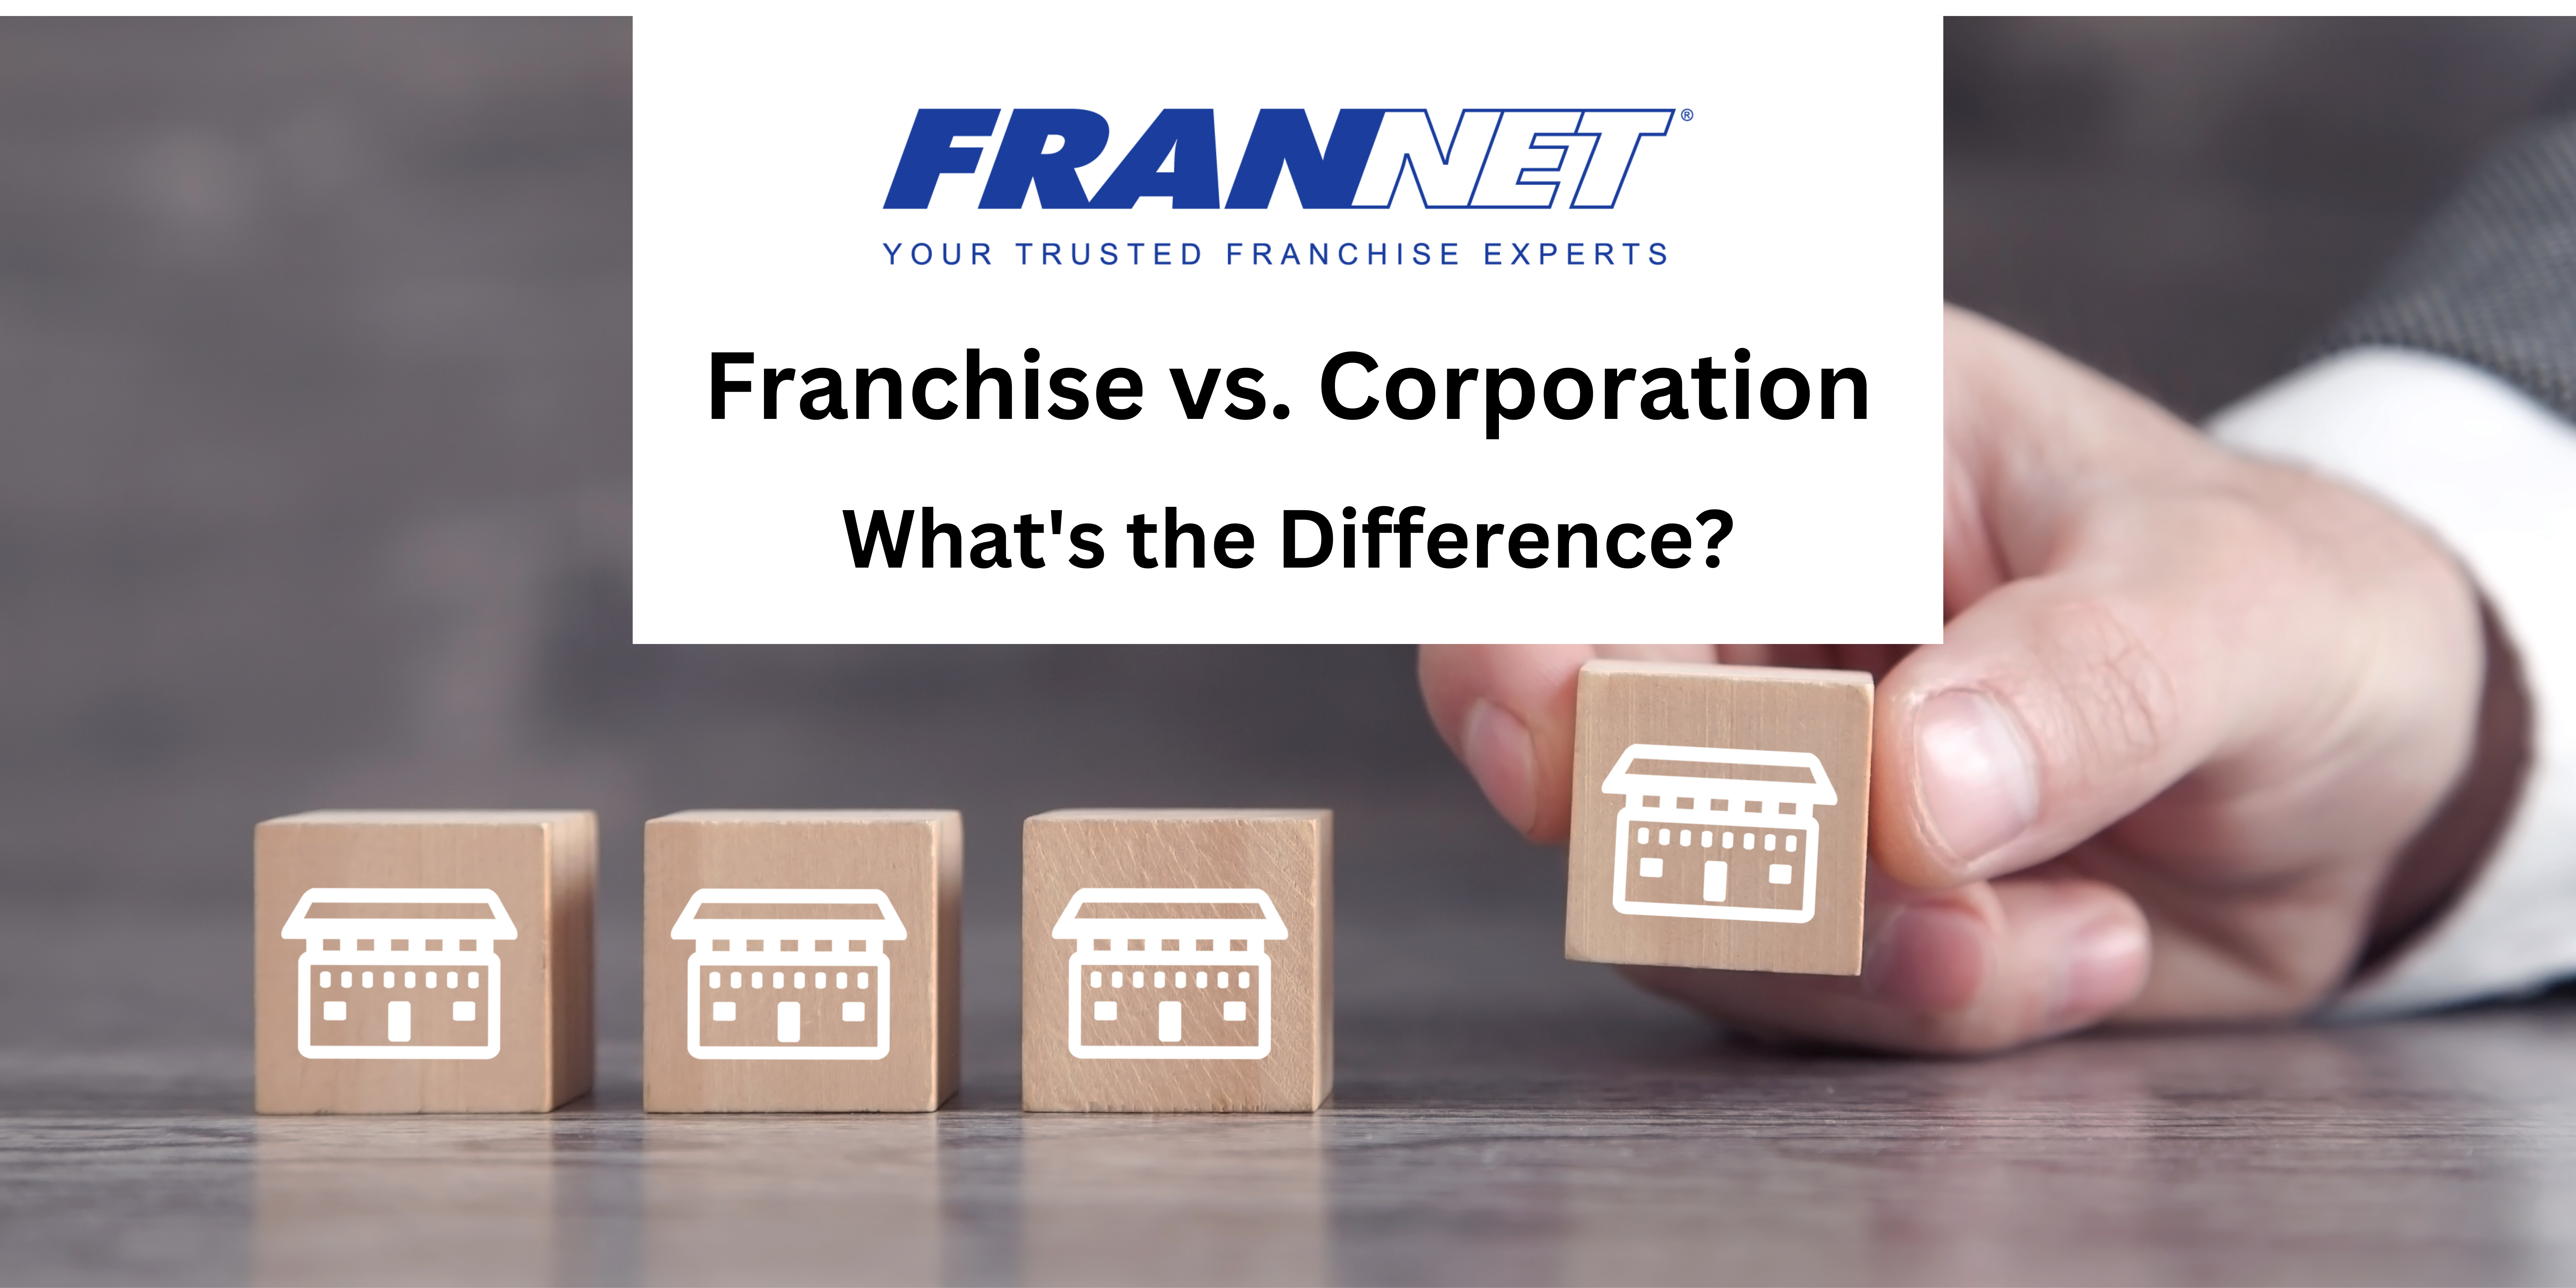 Franchise vs. Corporation: What's the Difference?